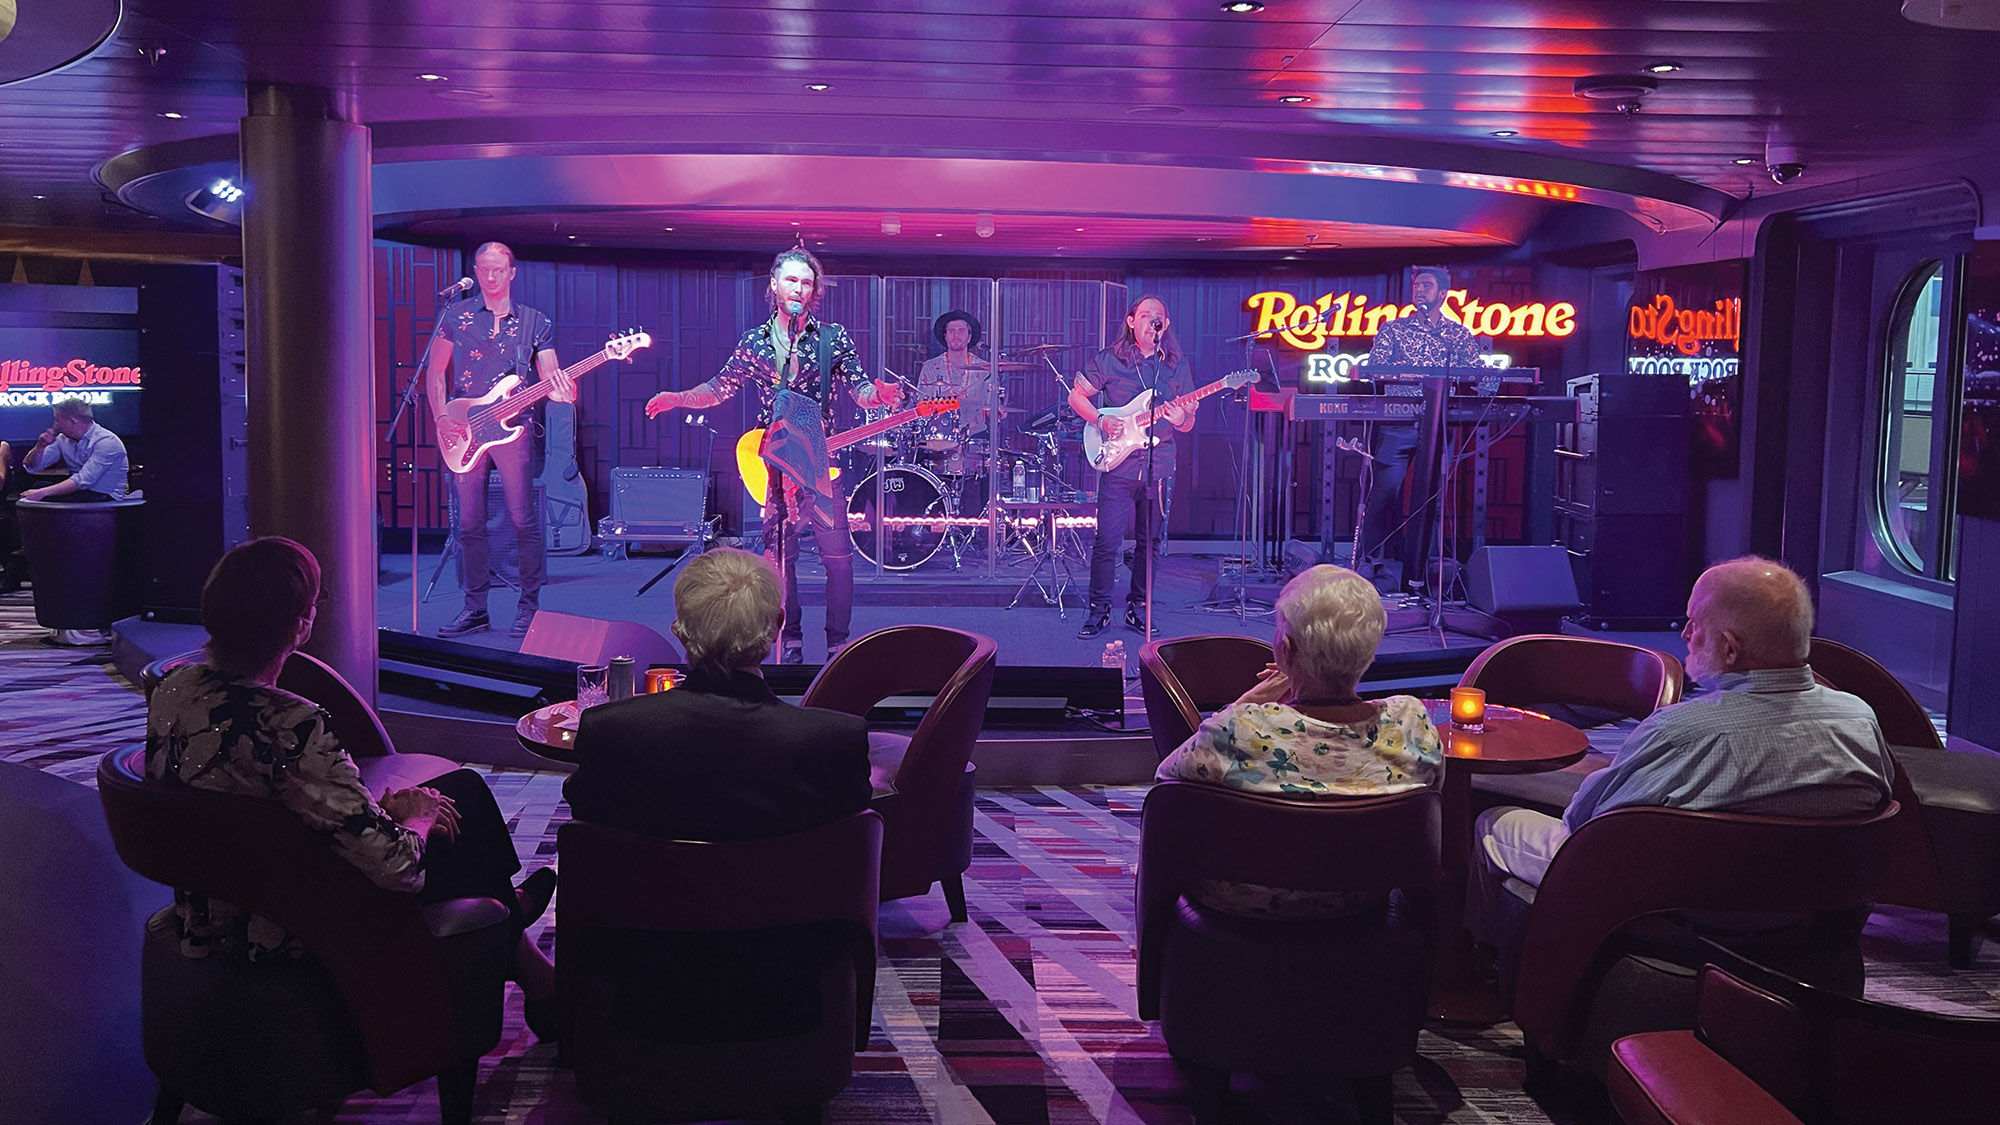 The Rolling Stone Rock Room on the Holland America Line Rotterdam.